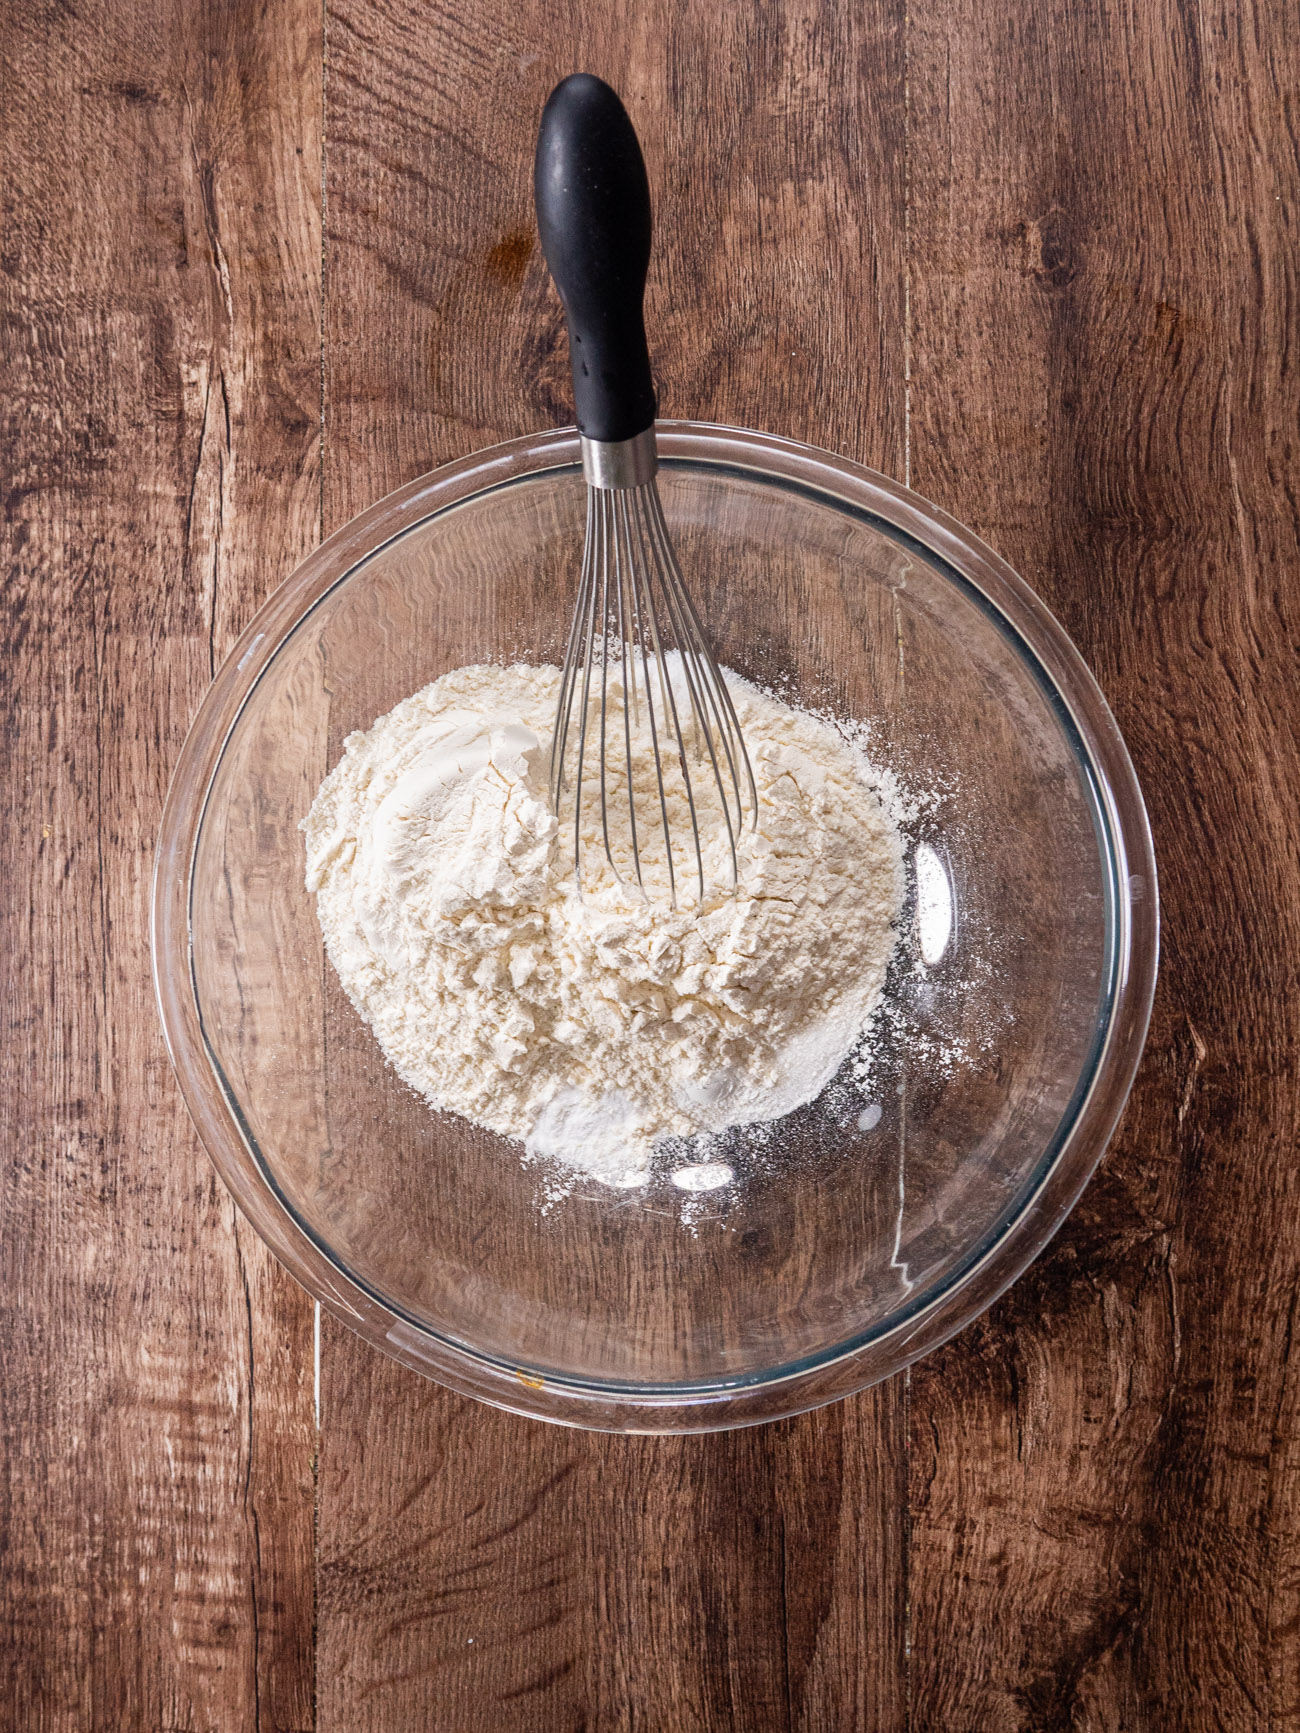 In a mixing bowl, combine the dry ingredients (first five ingredients) and stir well.